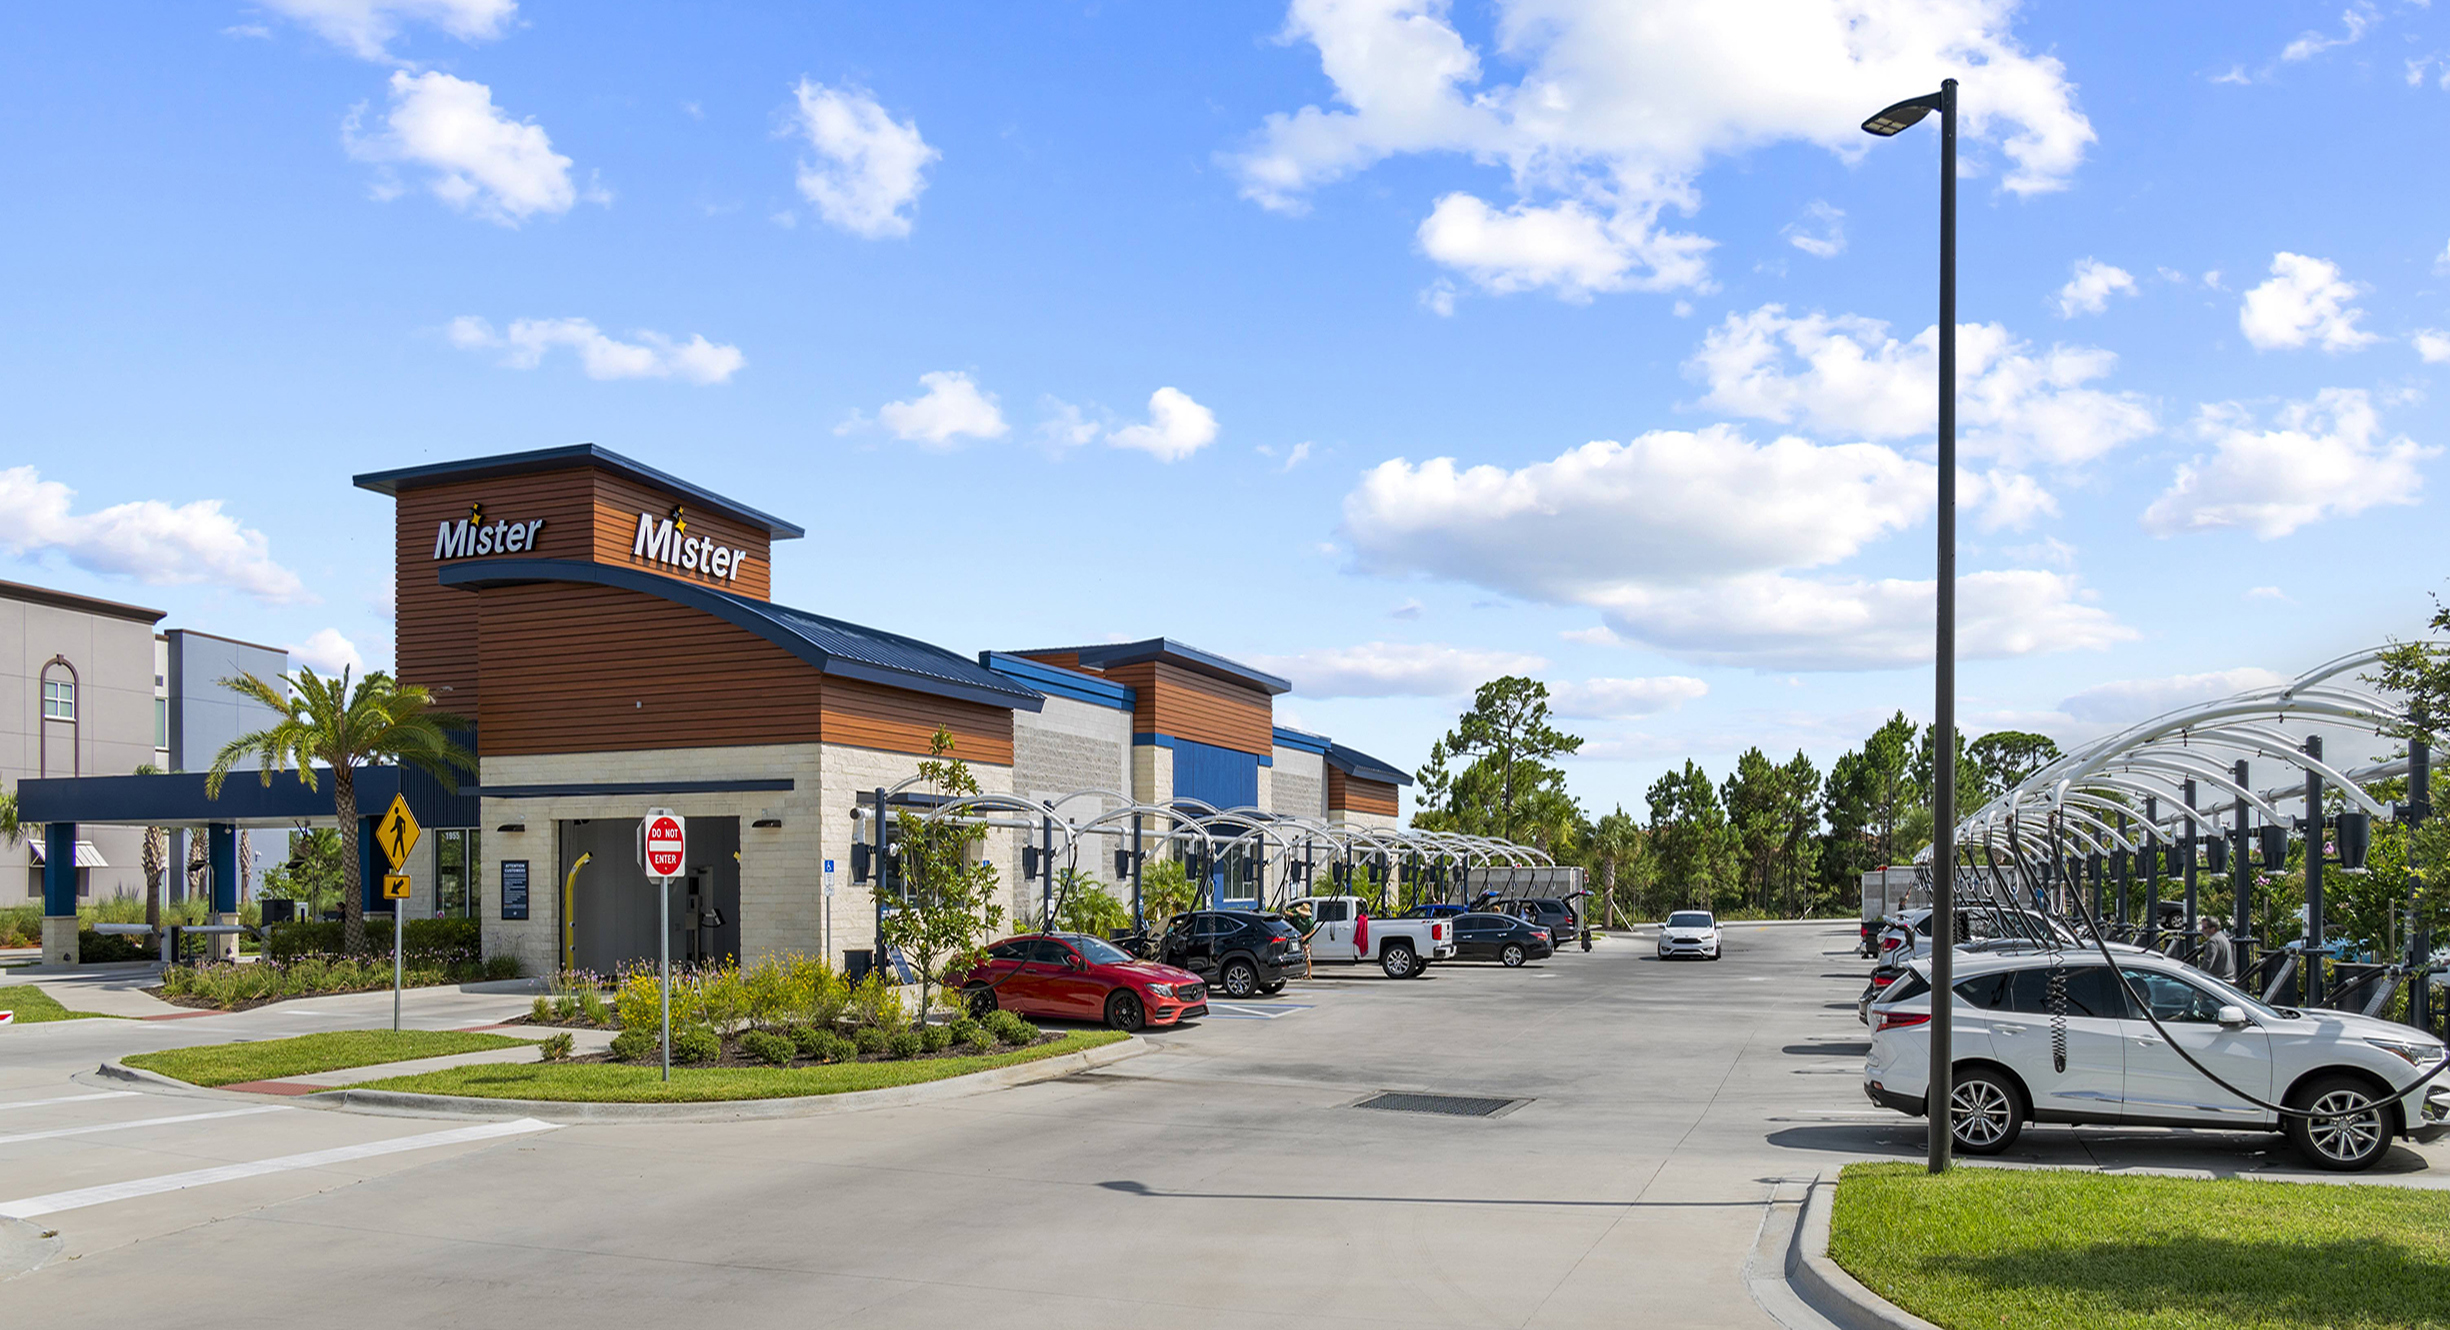 RealSource Group Completes Over $100 Million in Single-Tenant Express Car Wash Sales in 2022